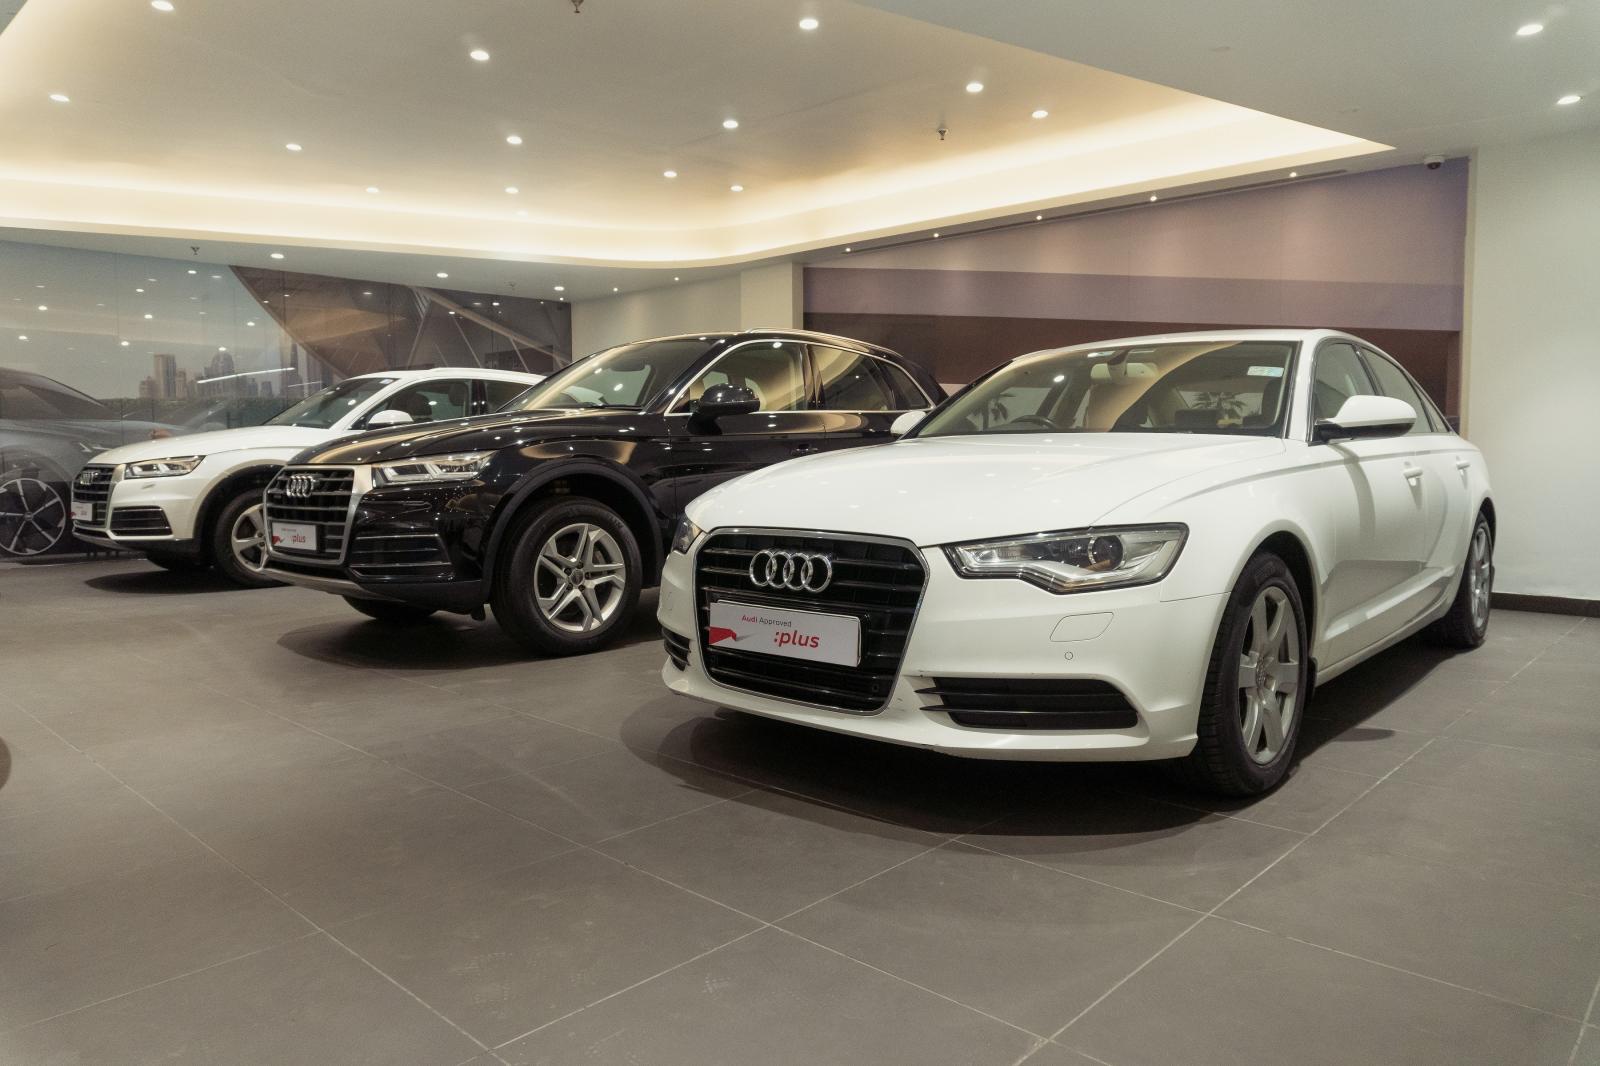 Audi India Opens its Pre-owned Luxury Car Showroom in Ahmedabad